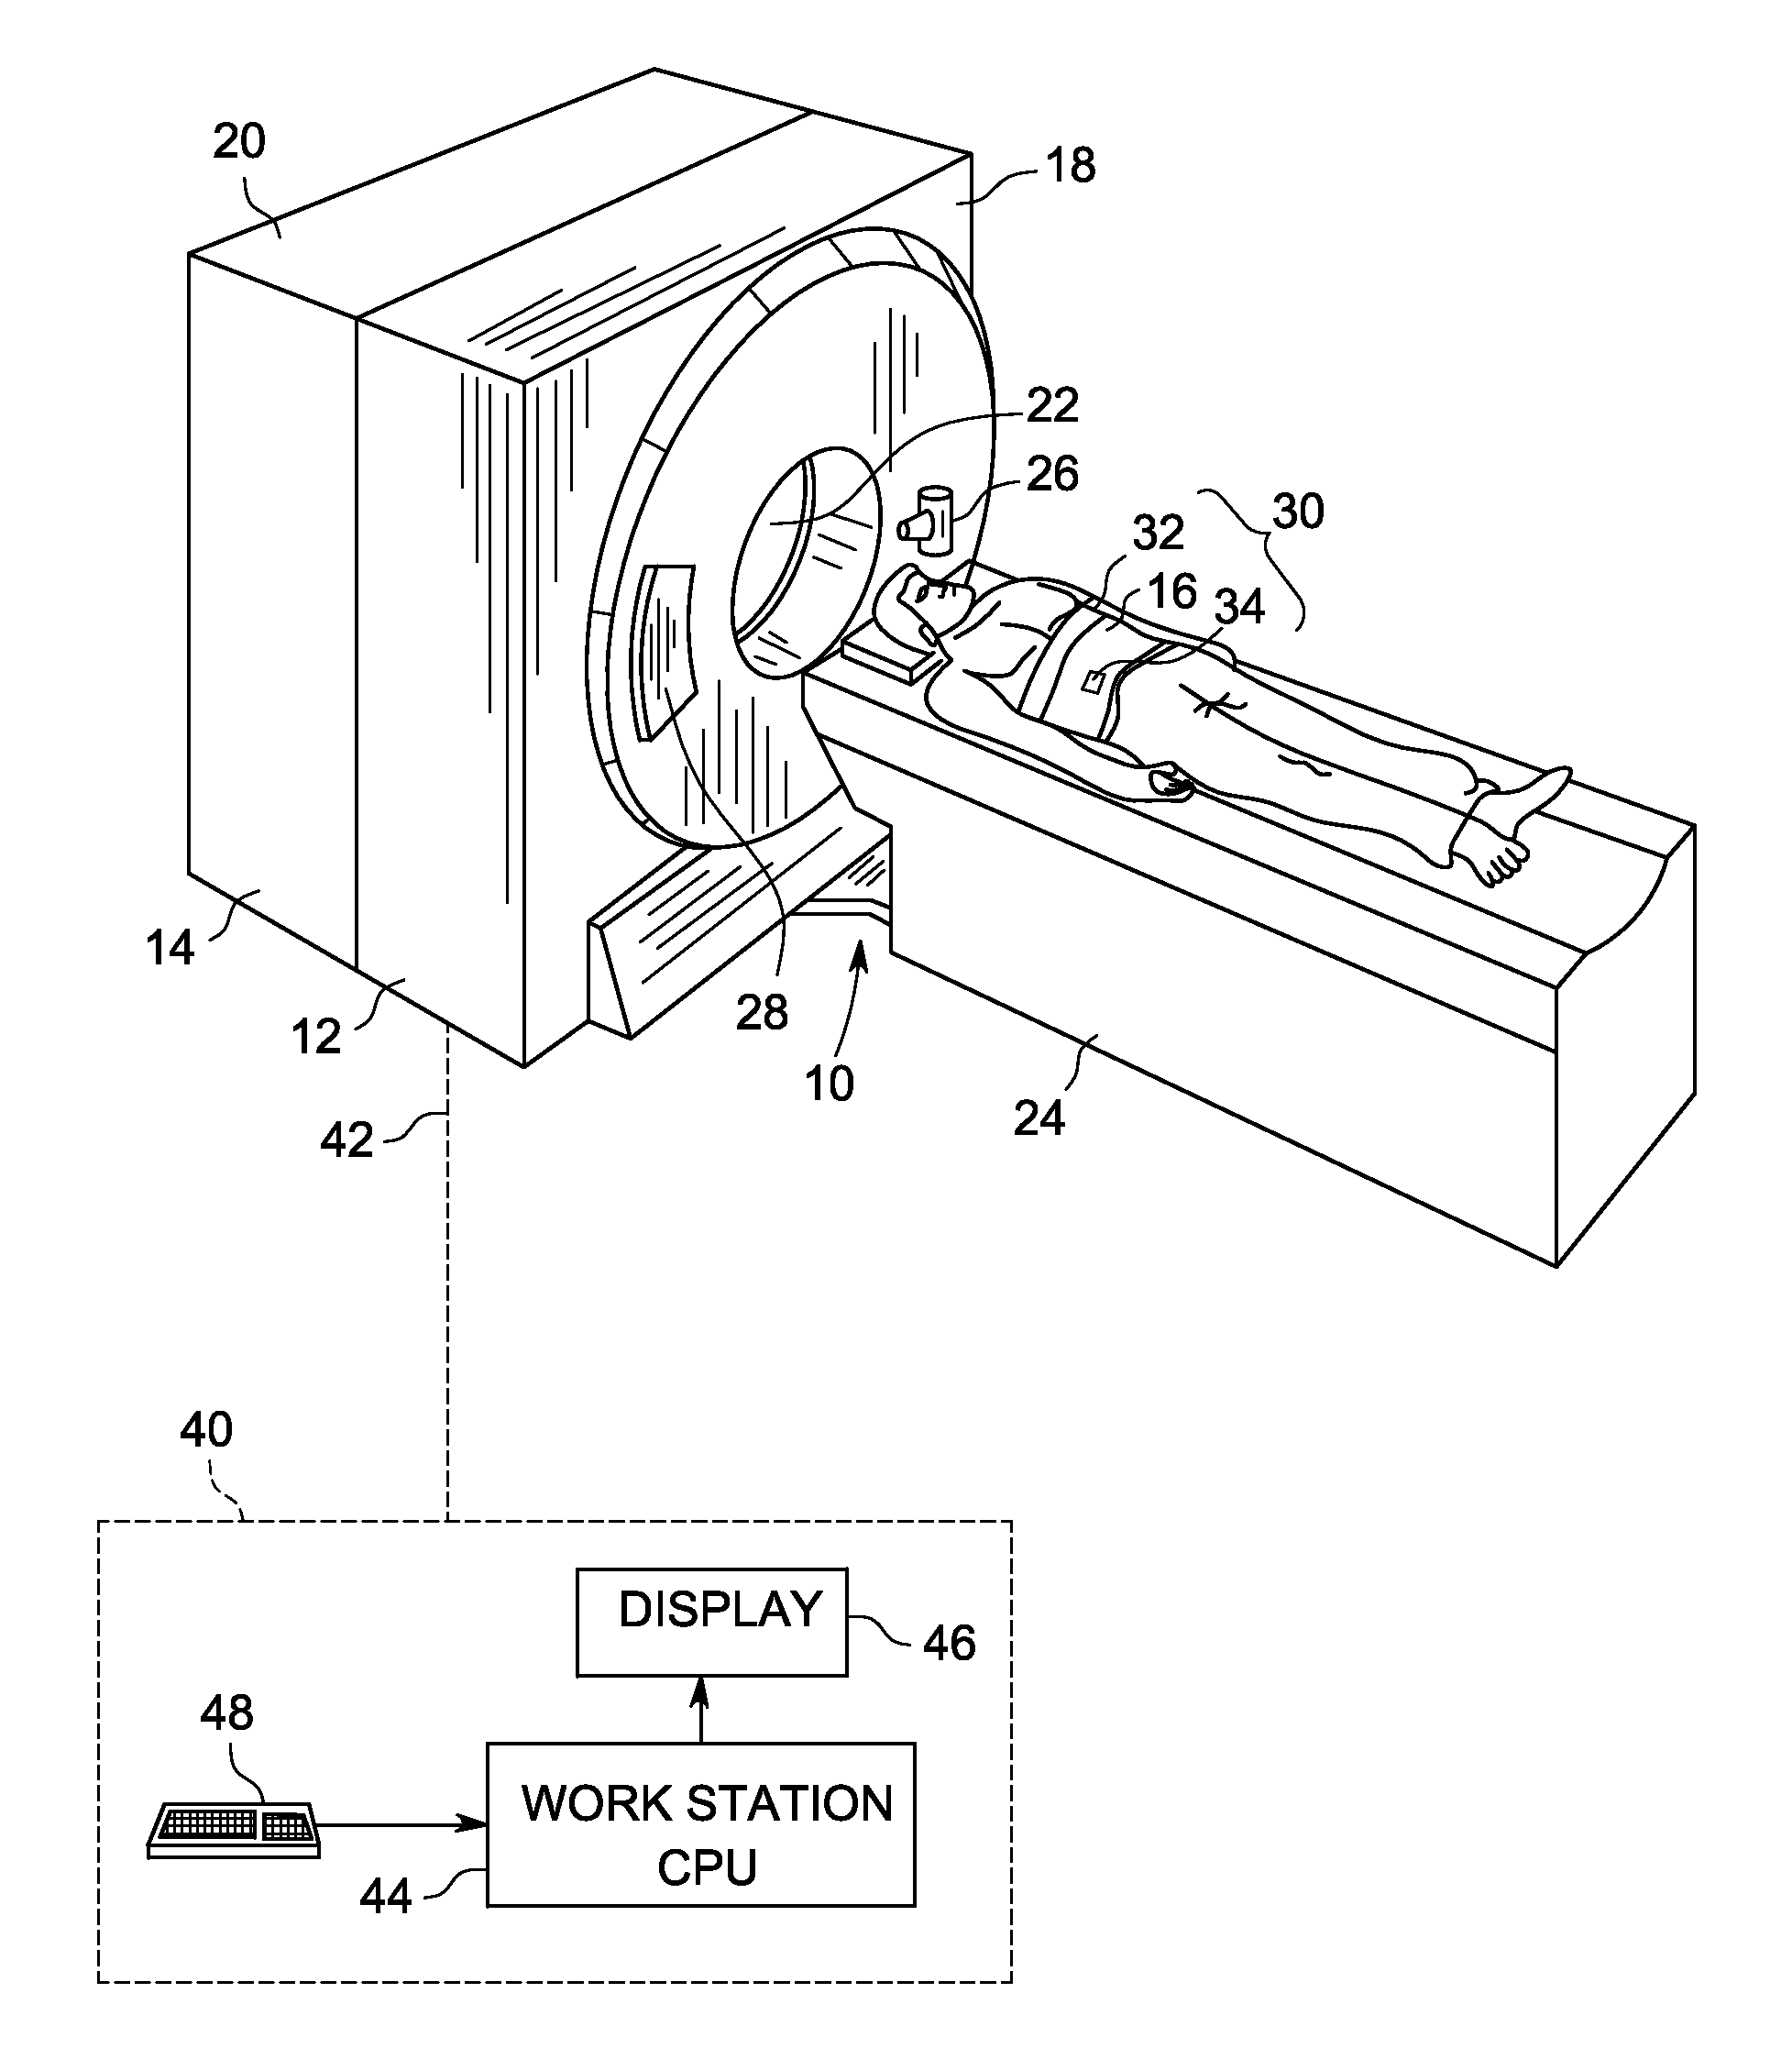 Method and apparatus for generating medical images